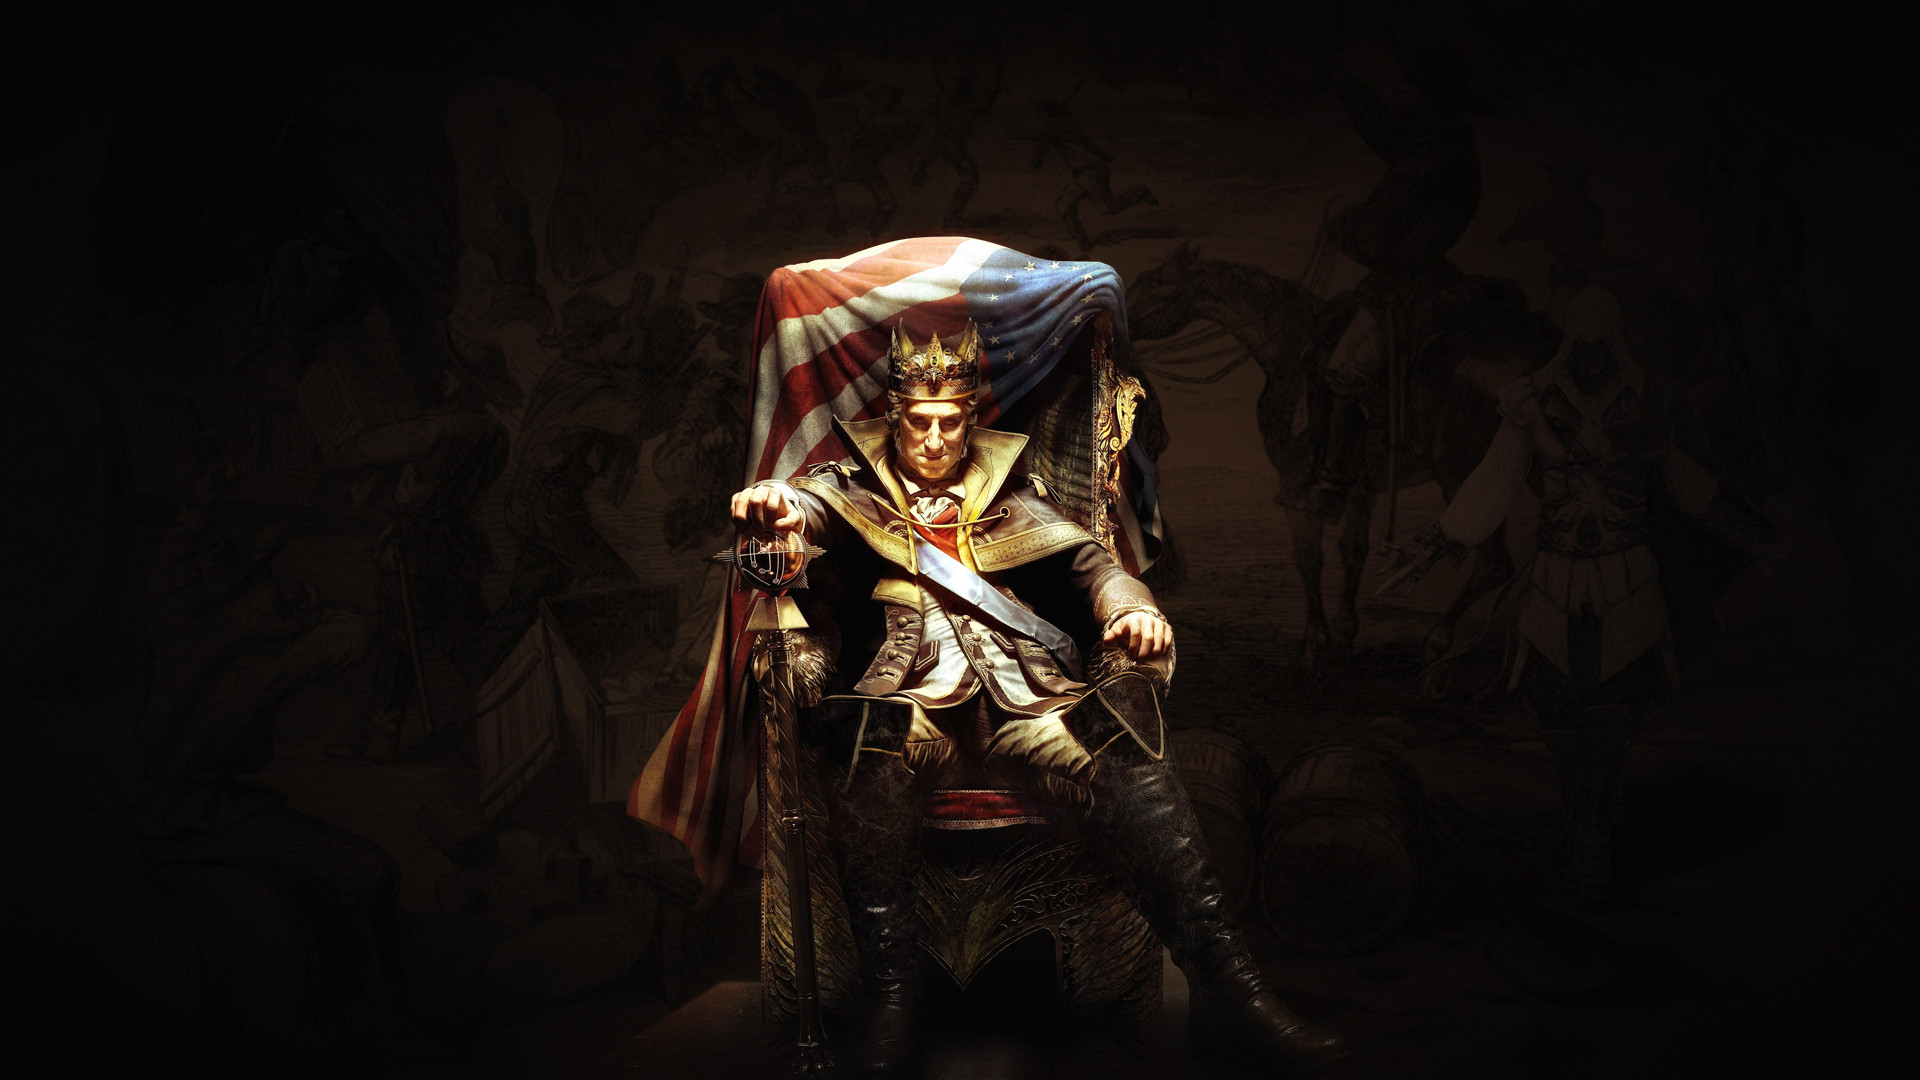 Made A Wallpaper Of Evil George Washington For My Desktop Maybe You